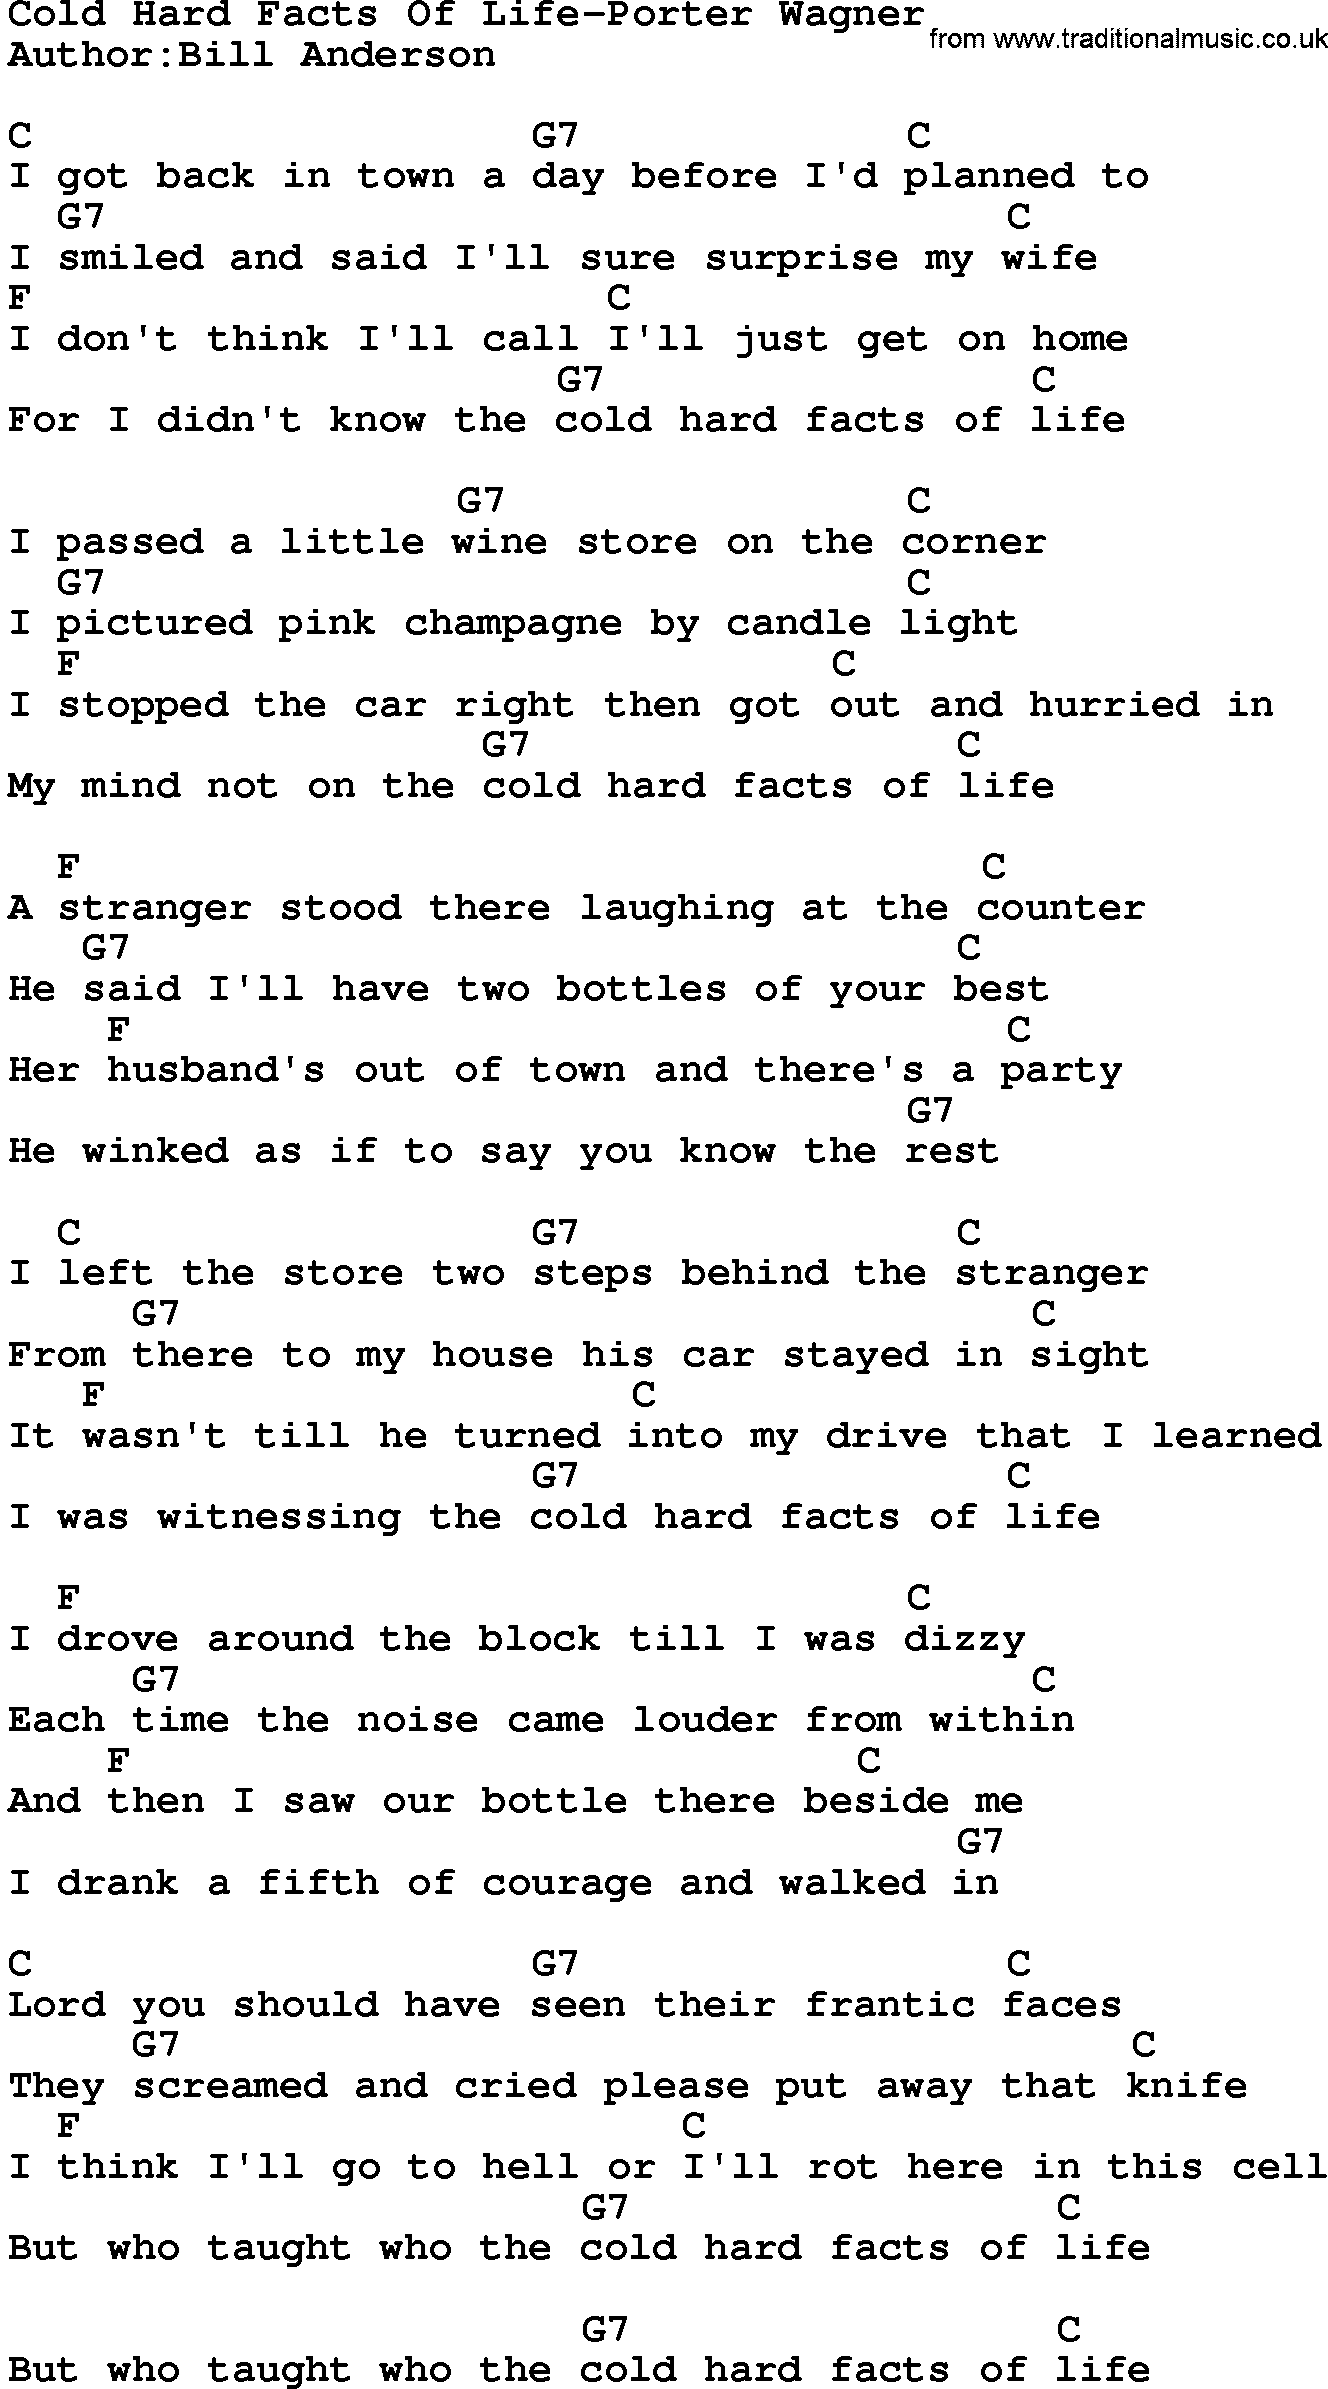 Country music song: Cold Hard Facts Of Life-Porter Wagner lyrics and chords